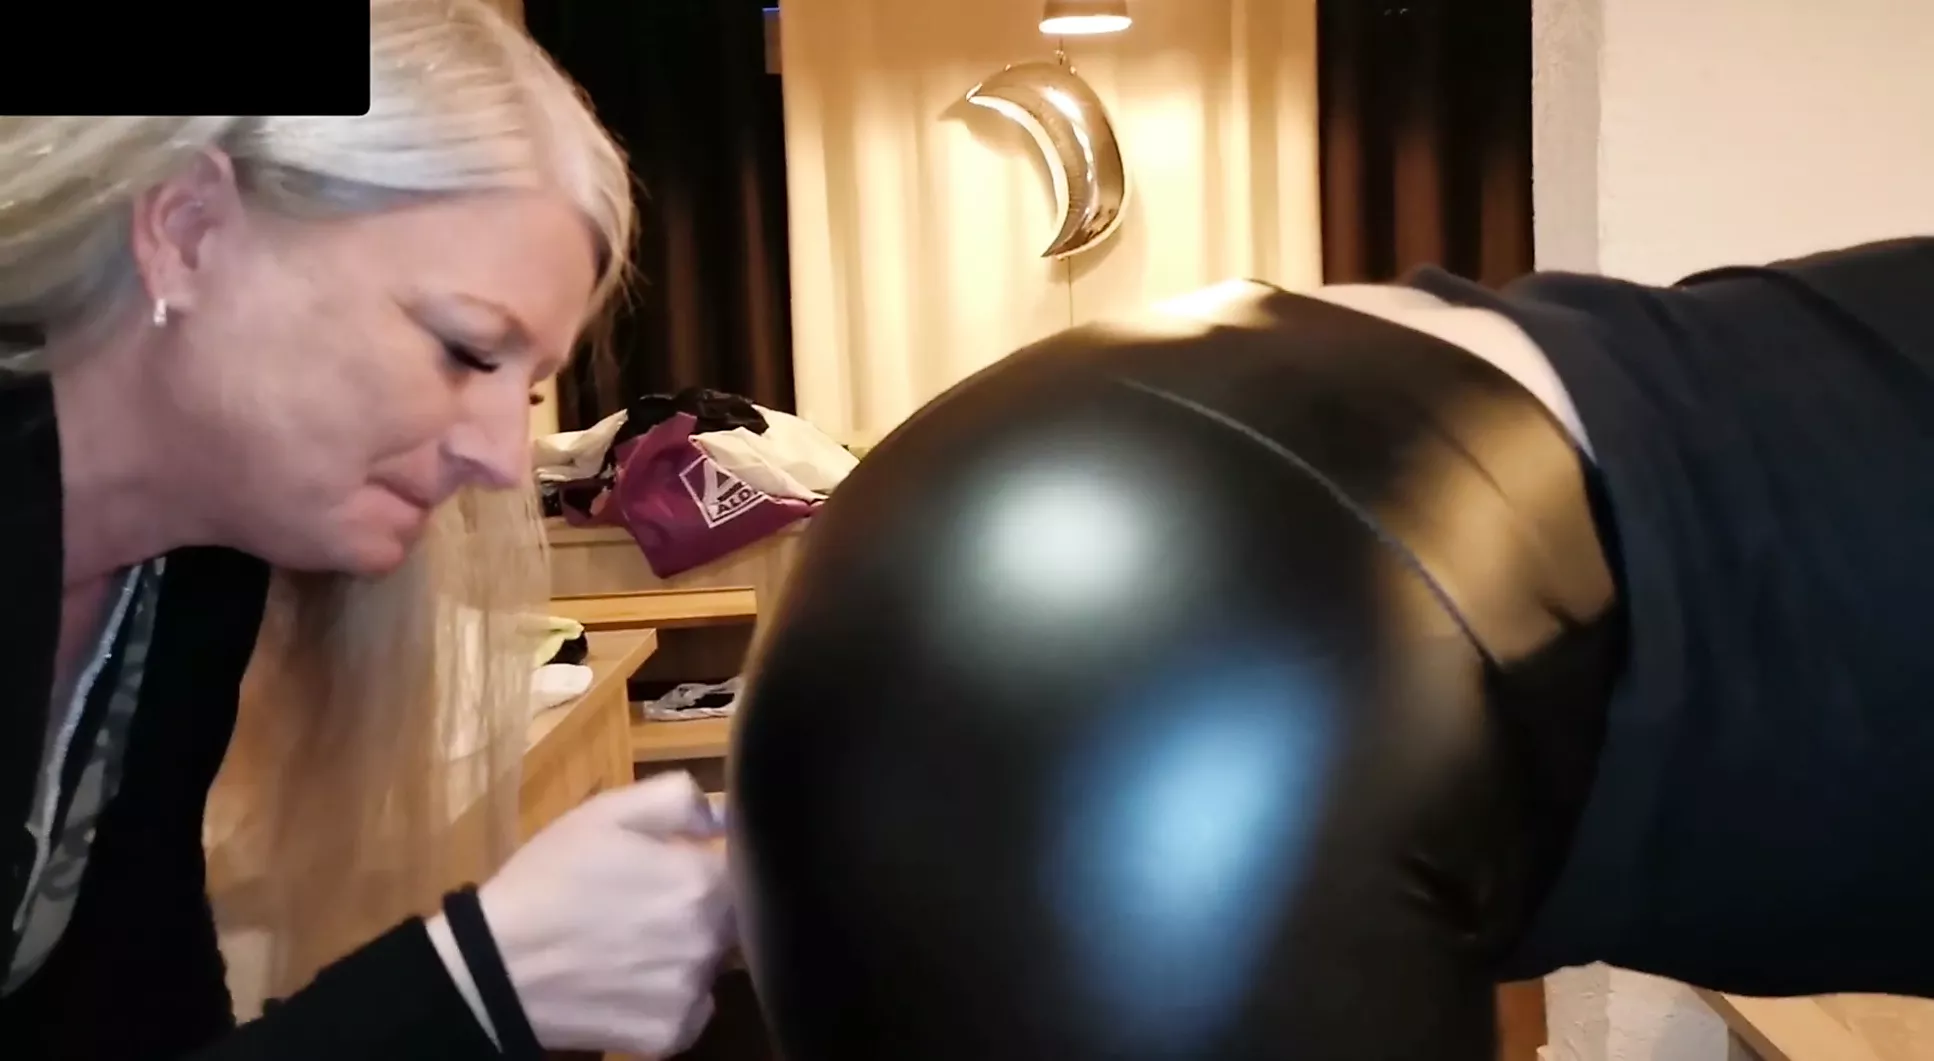 Slut in leather leggings gets cum on ass and milf licks clean image pic